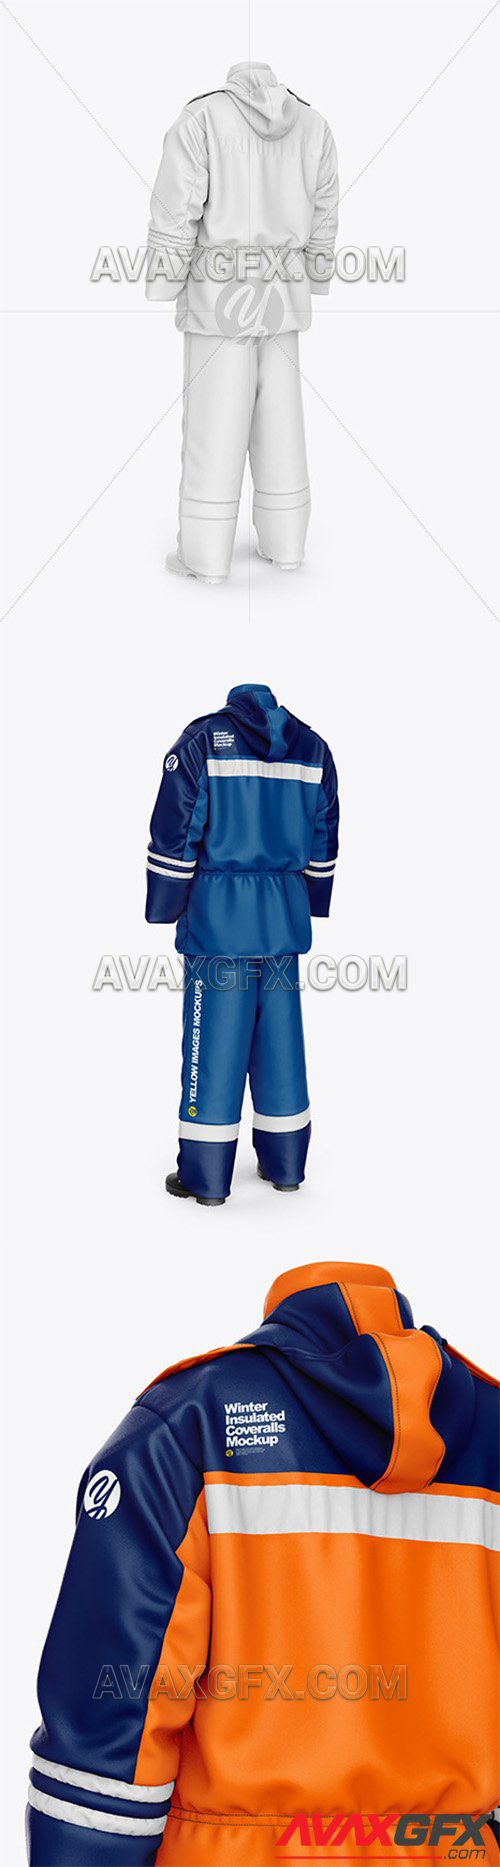 Winter Insulated Coveralls Mockup – Back Half Side View 57748